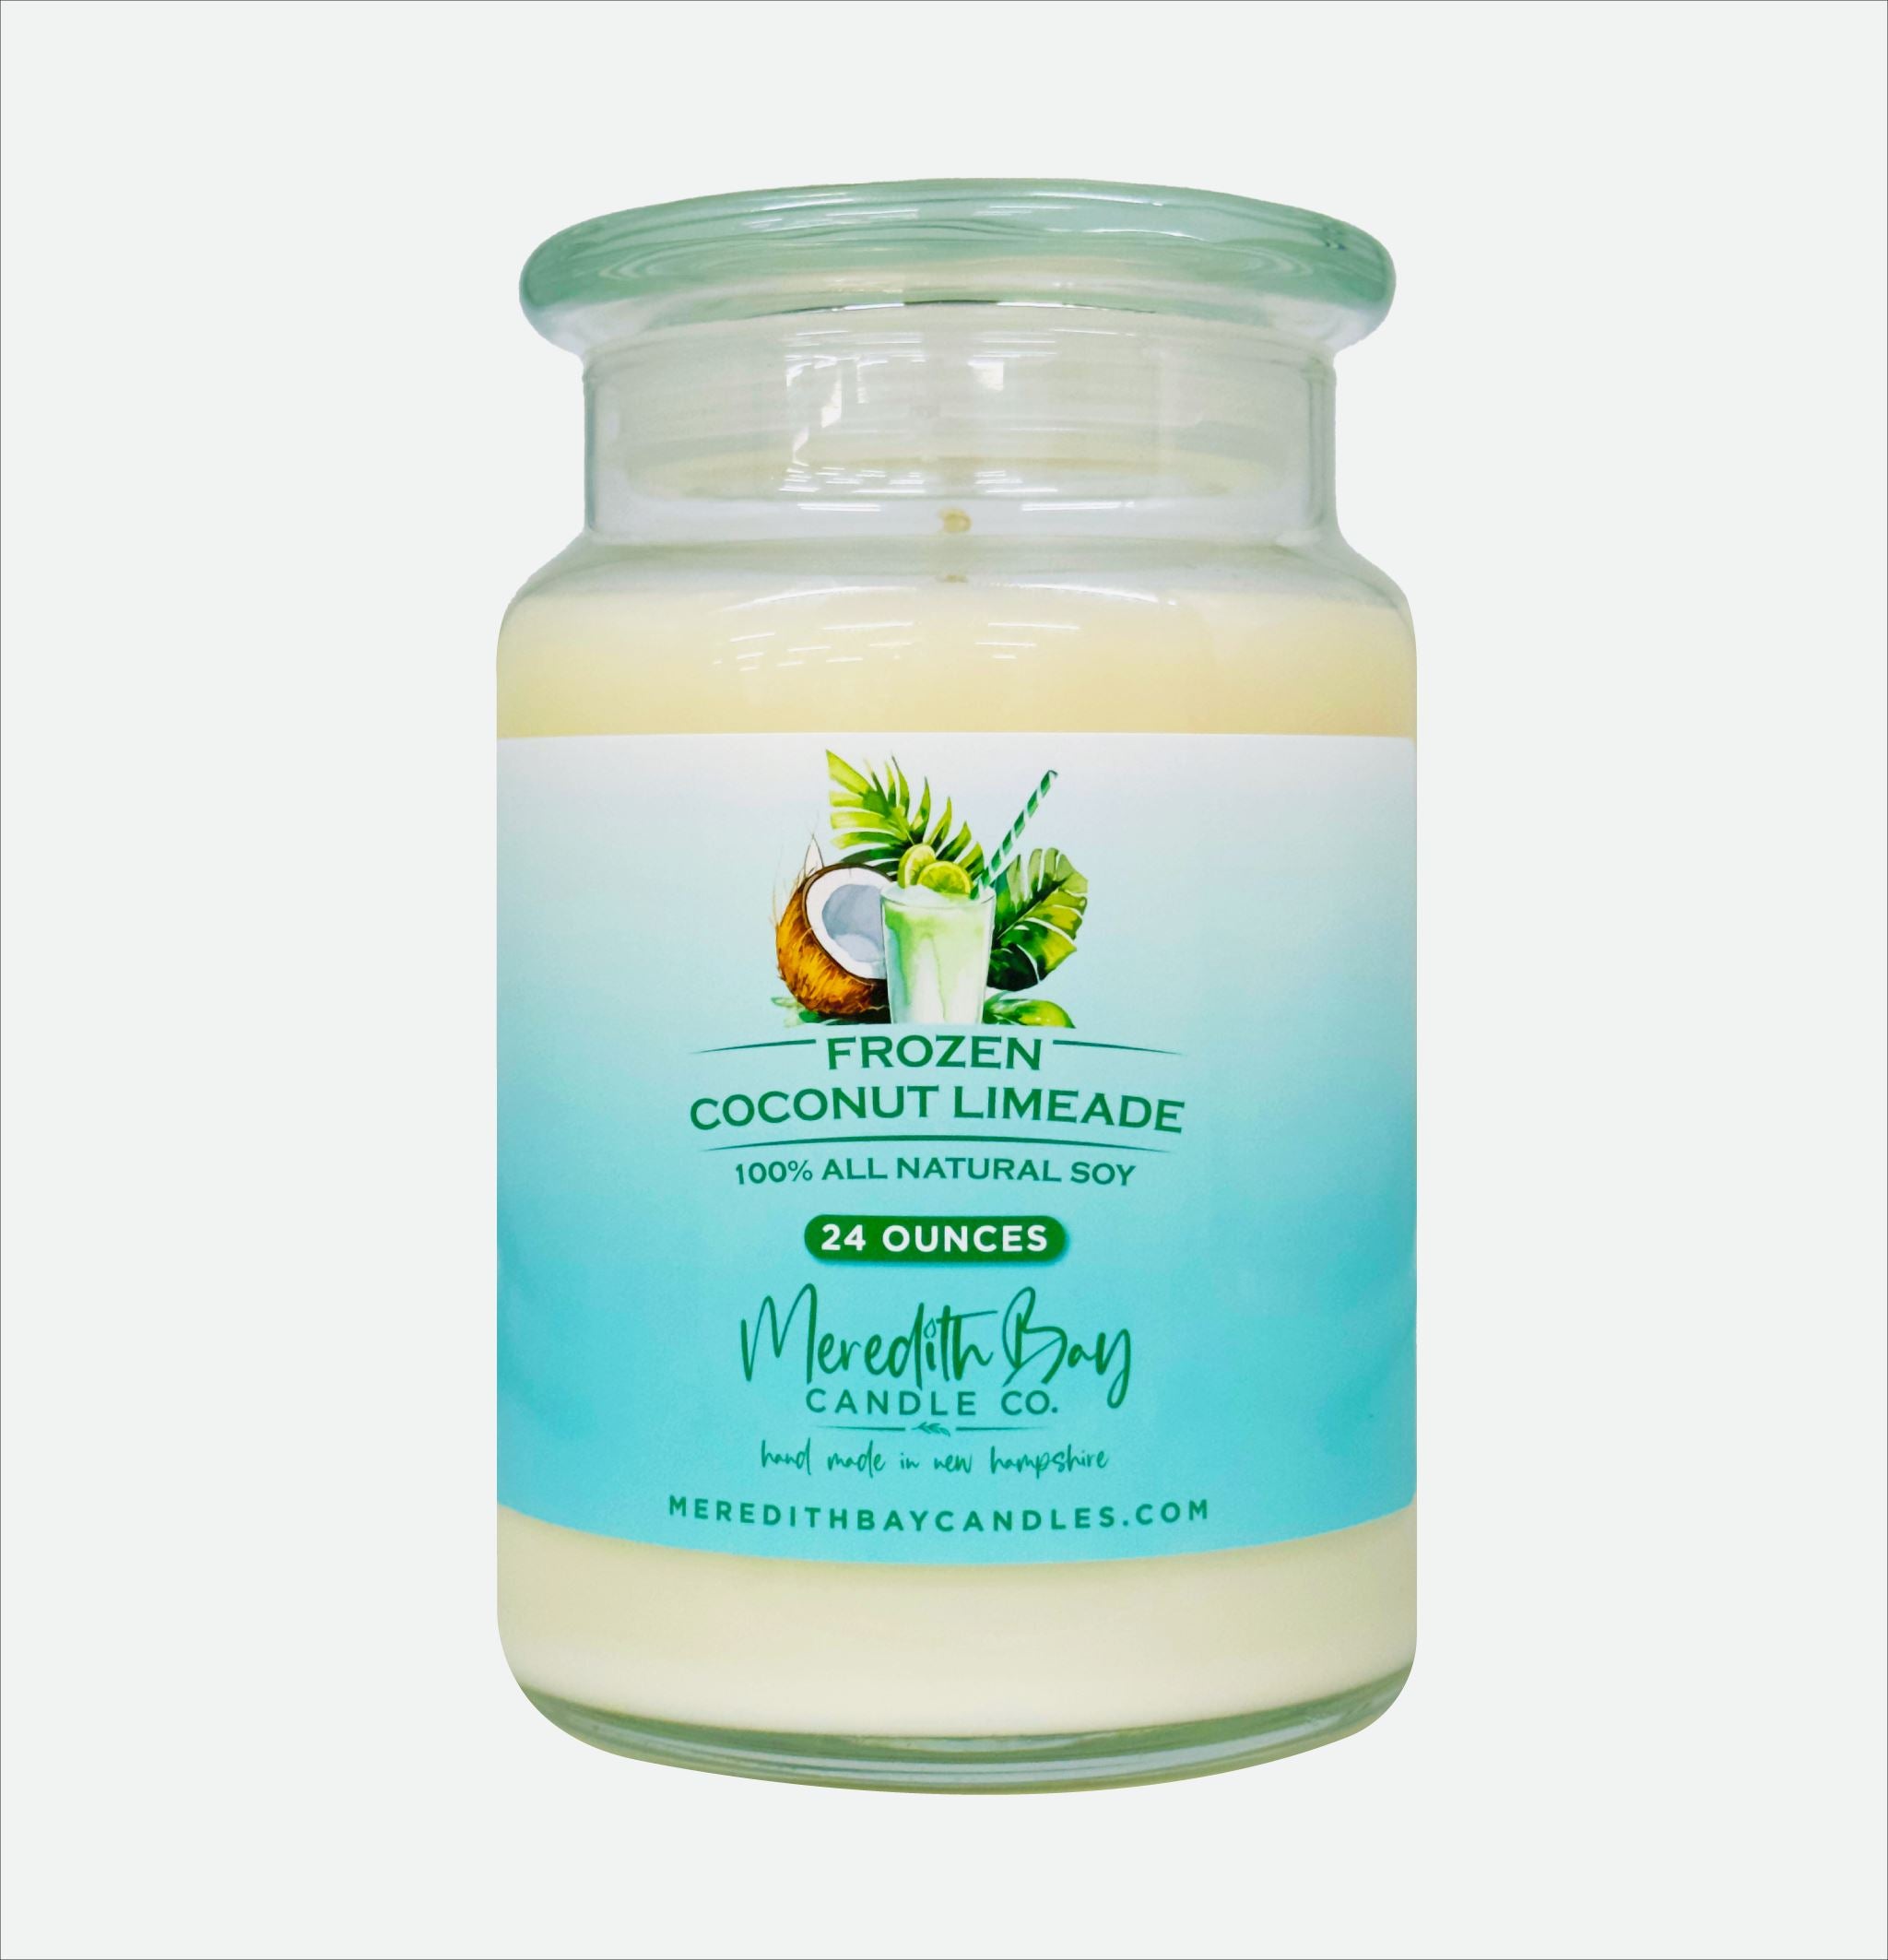 Frozen Coconut Limeade Soy Candle Meredith Bay Candle Co 24.0 Oz 